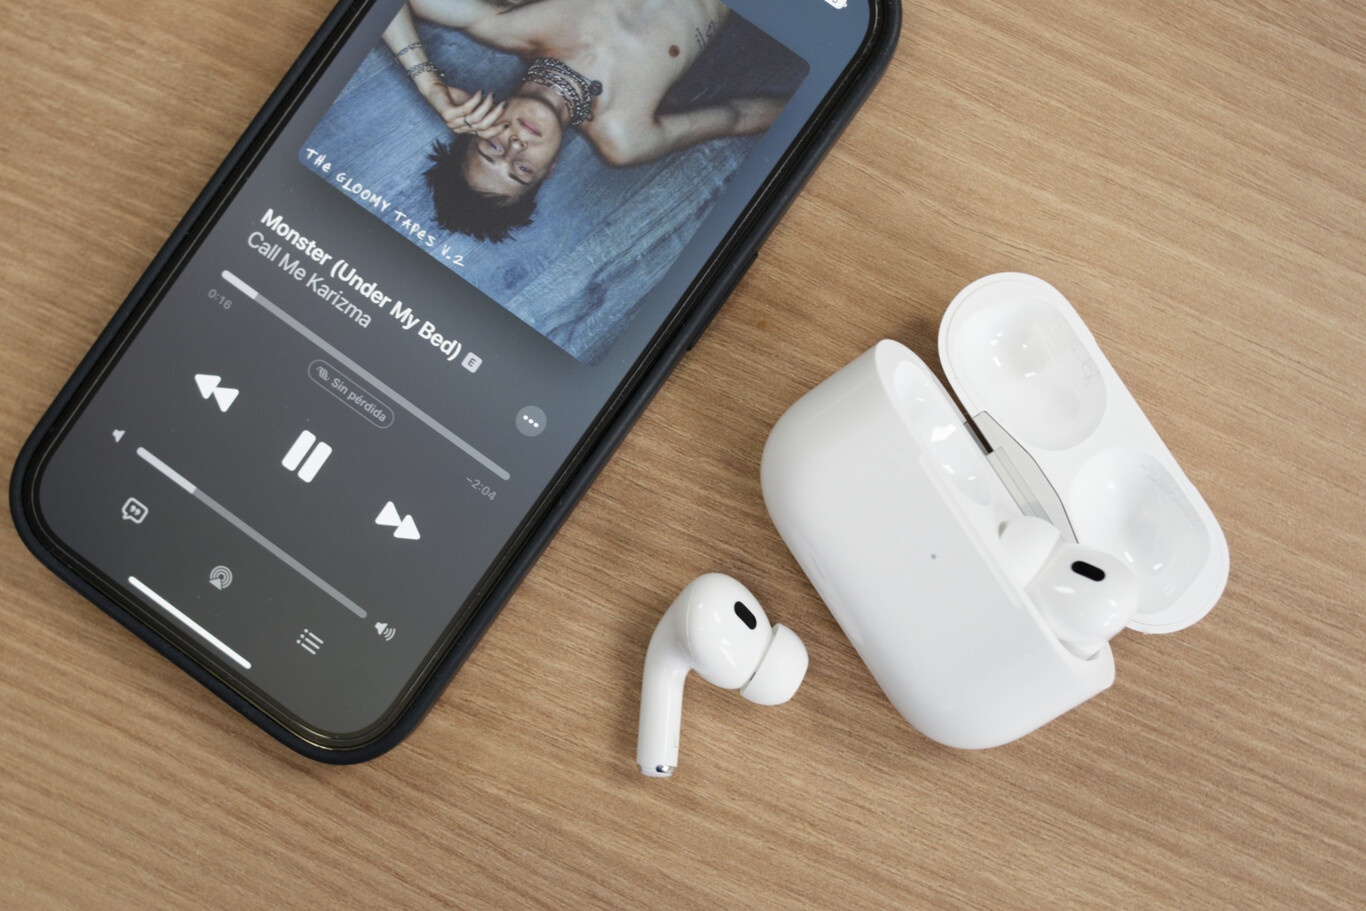 How To Connect Airpods To Chromecast